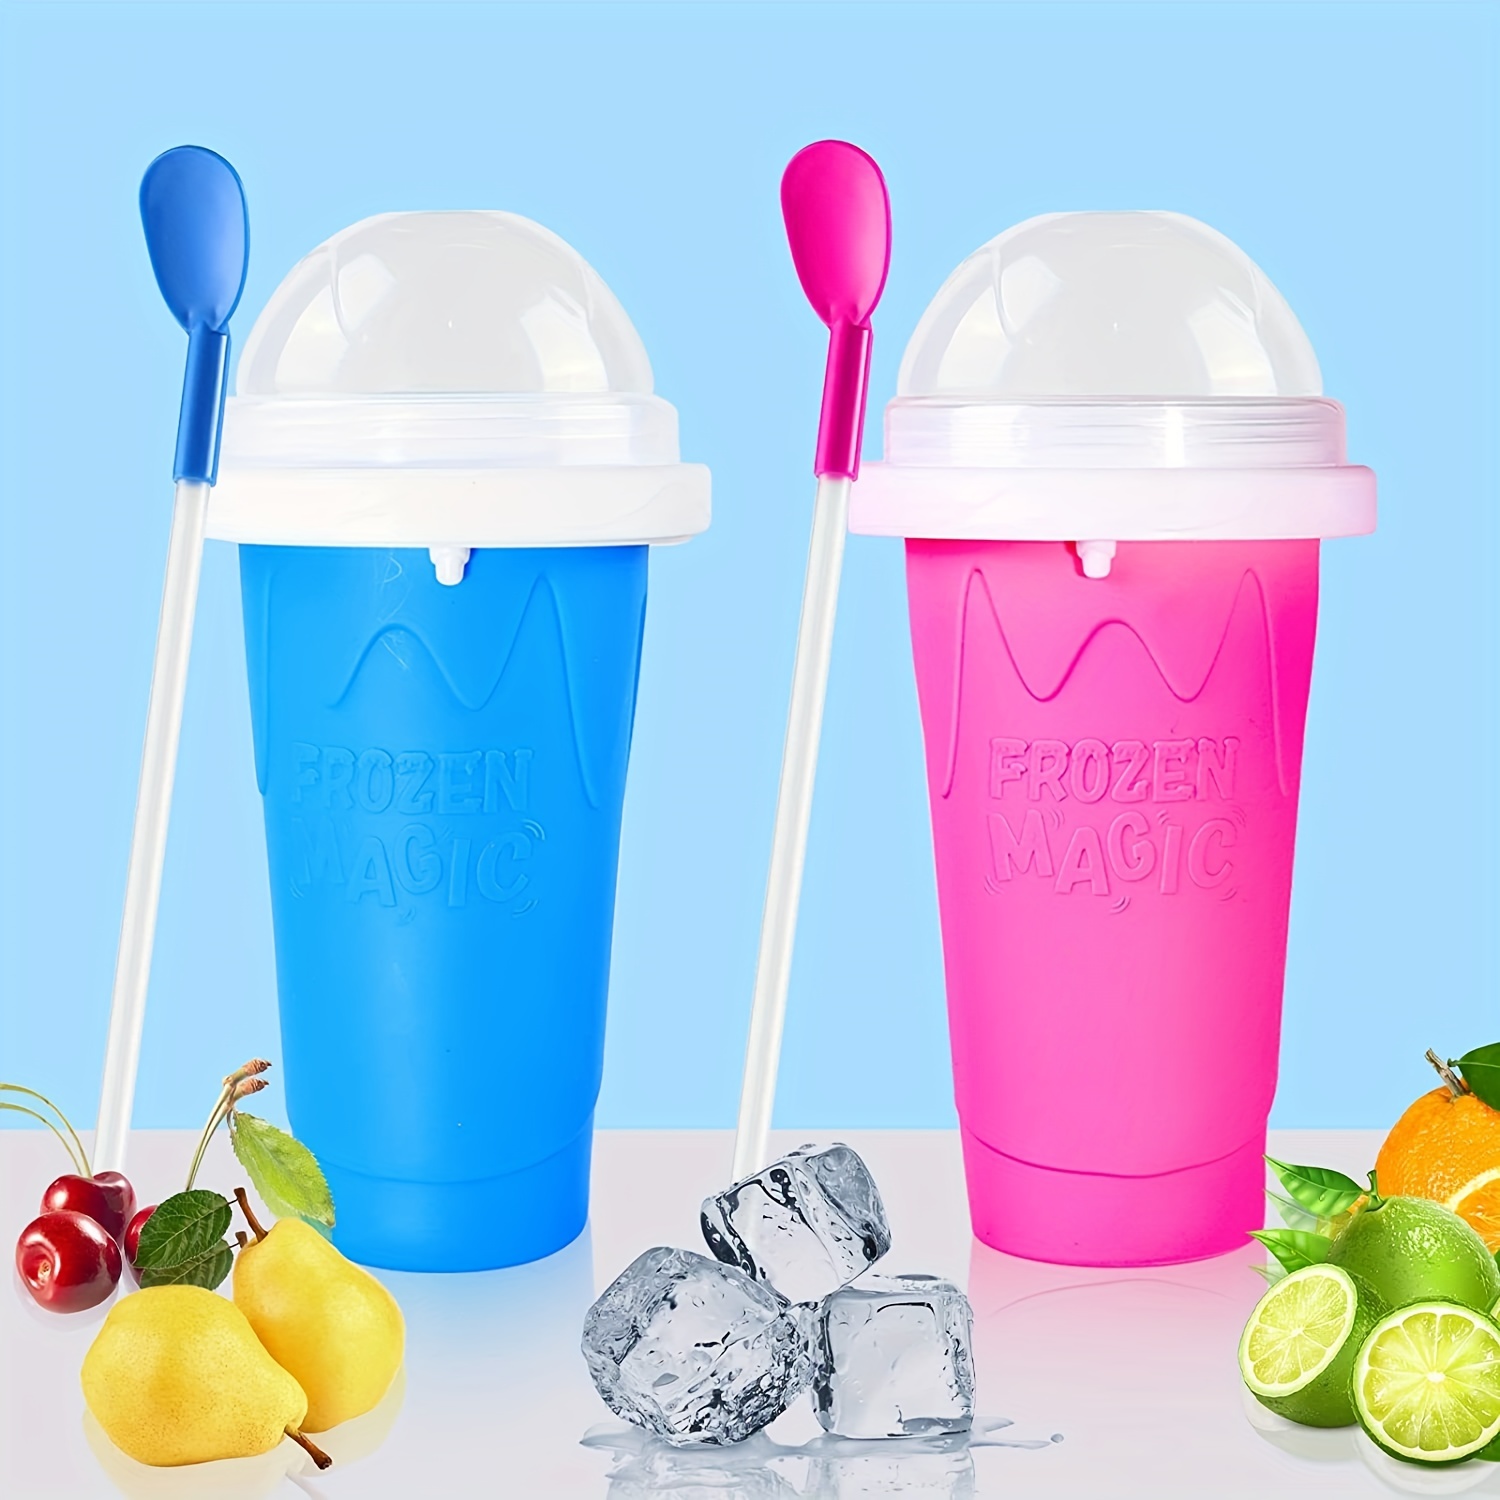 How To Make Frozen Cups, Freeze Cups, Icy Cups, Cool Cups